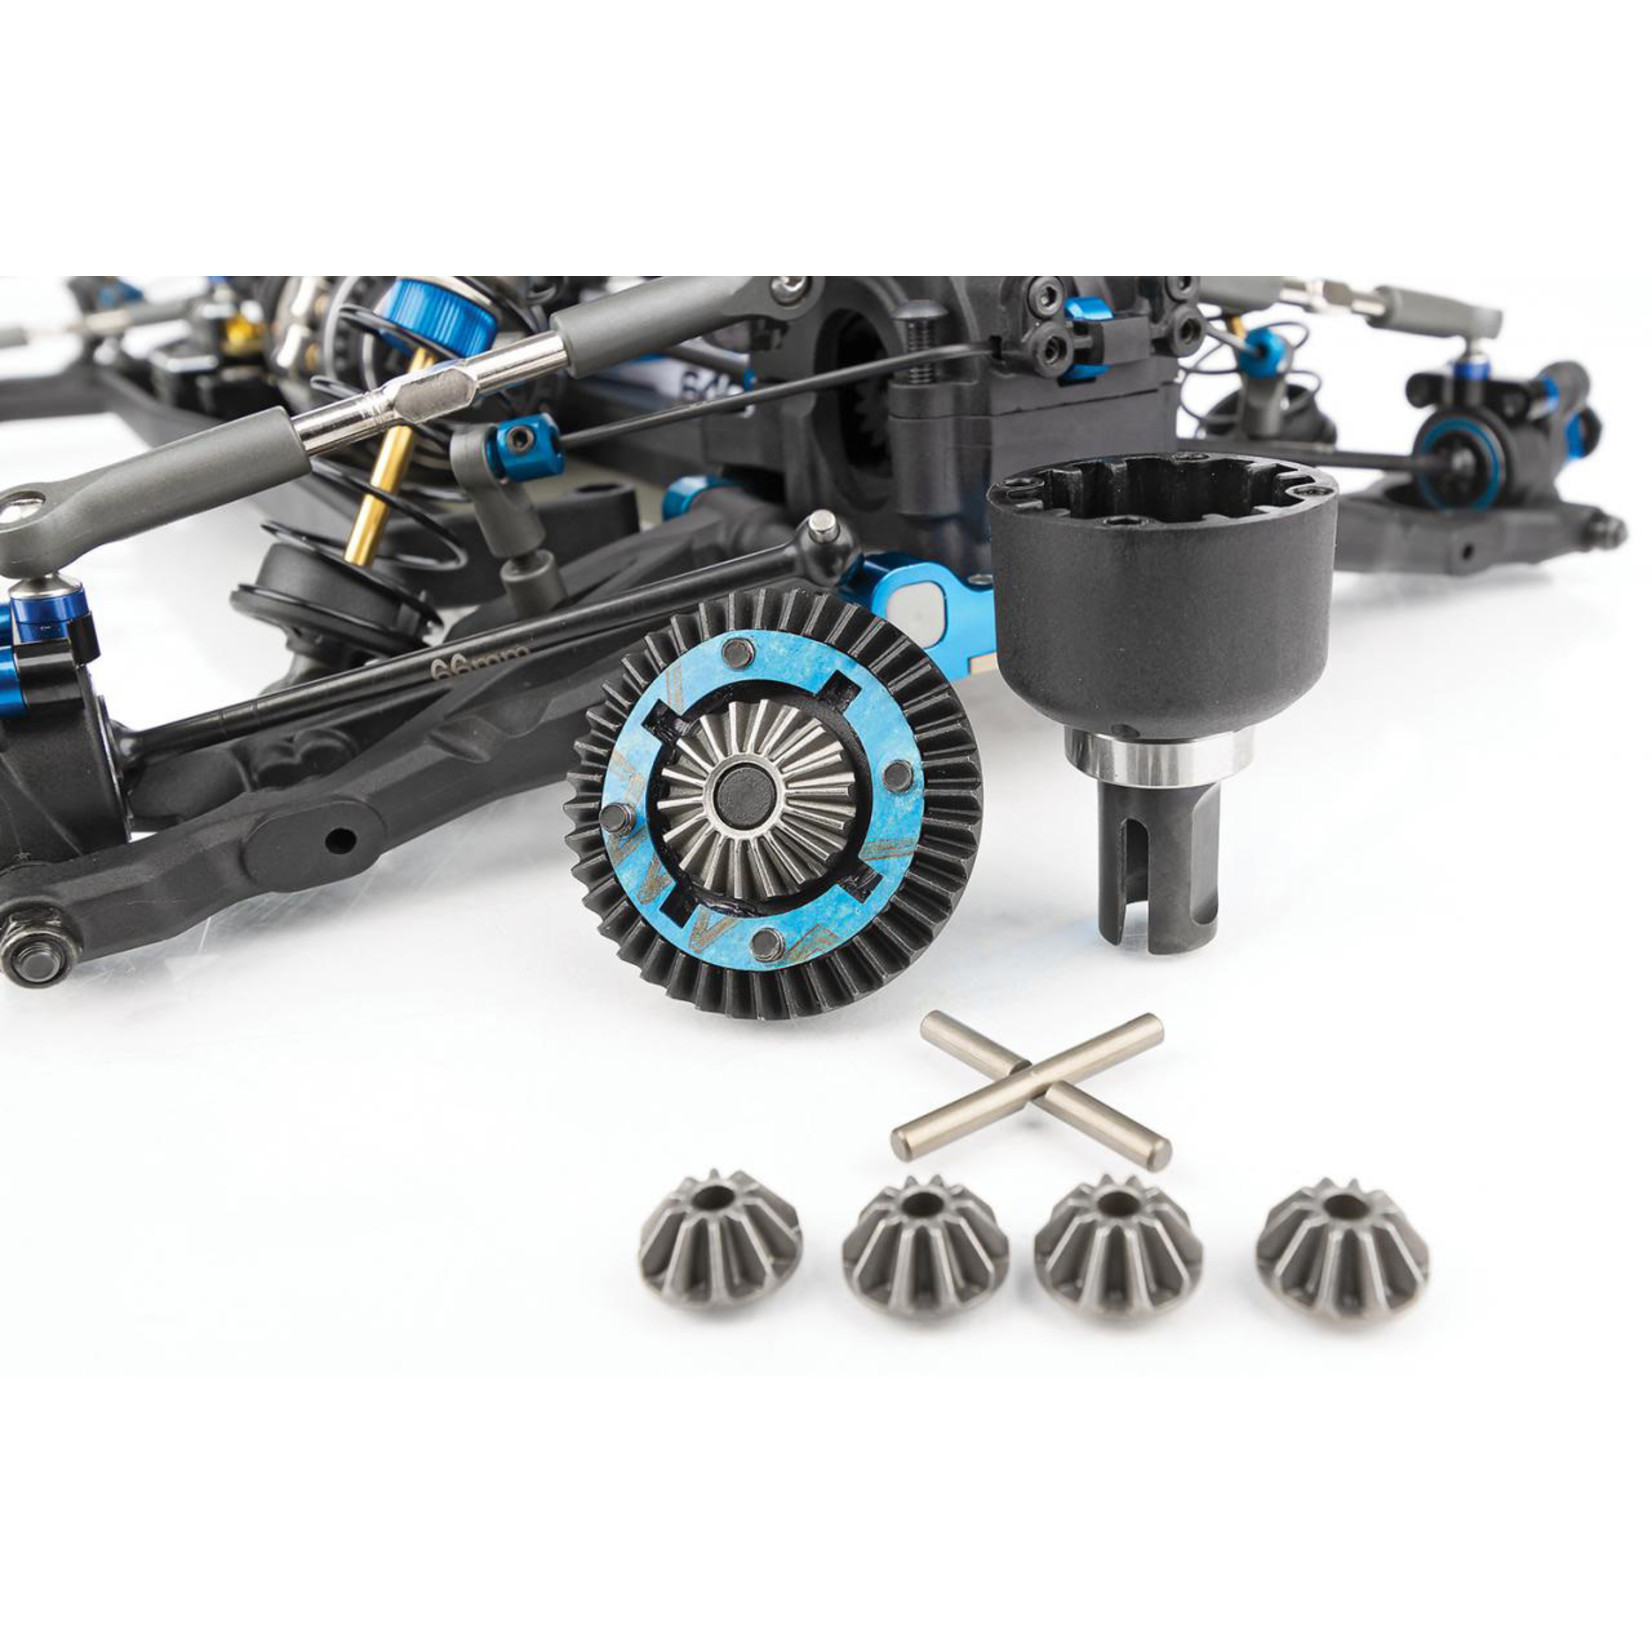 Team Associated RC10B74.2 Team 1/10 4WD Off-Road Electric Buggy Kit